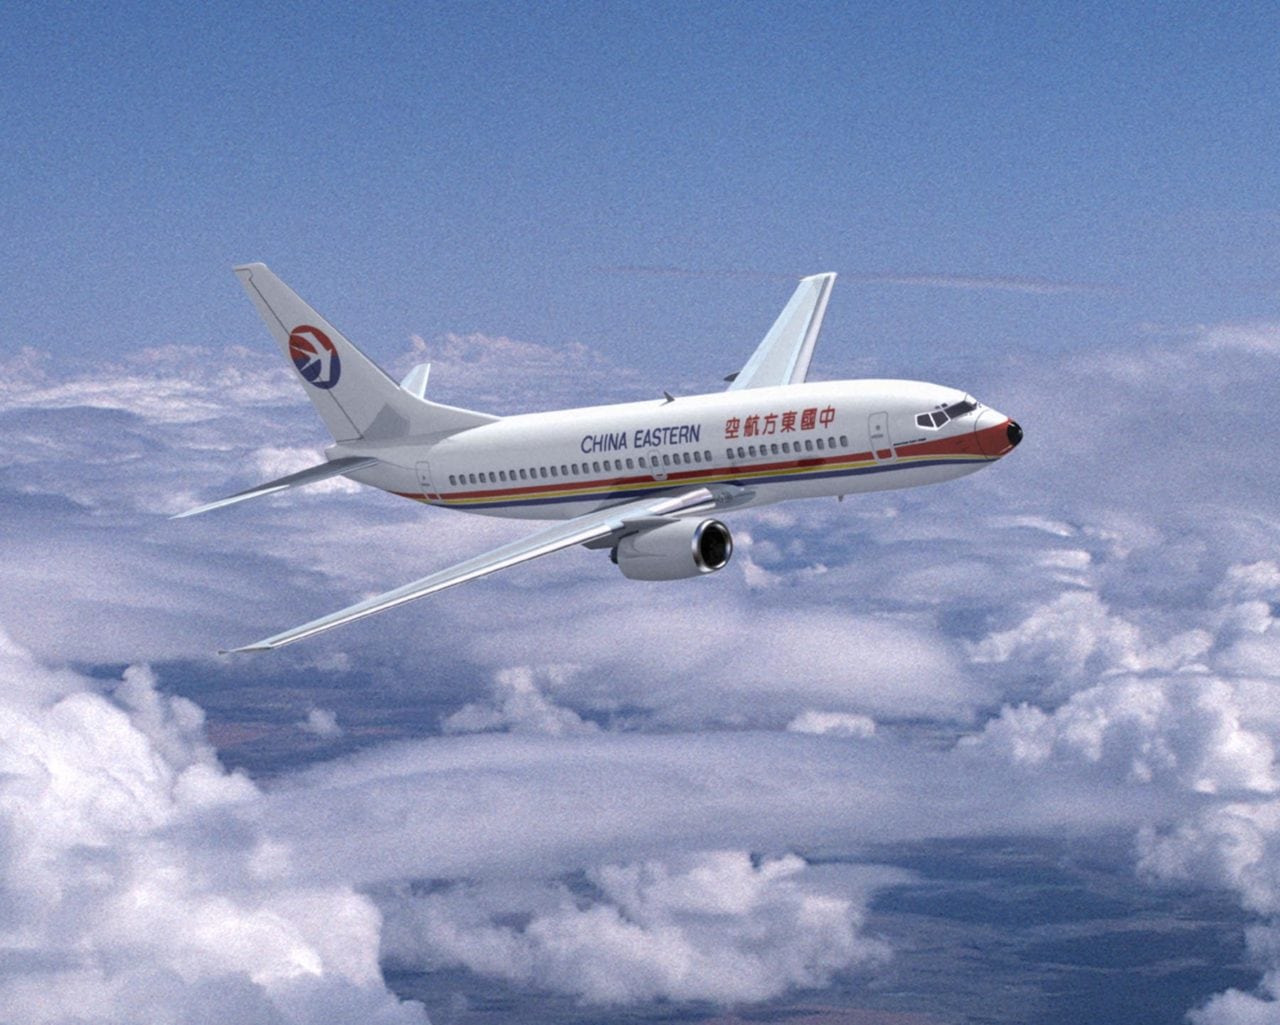 China Eastern Airlines aircraft in flight